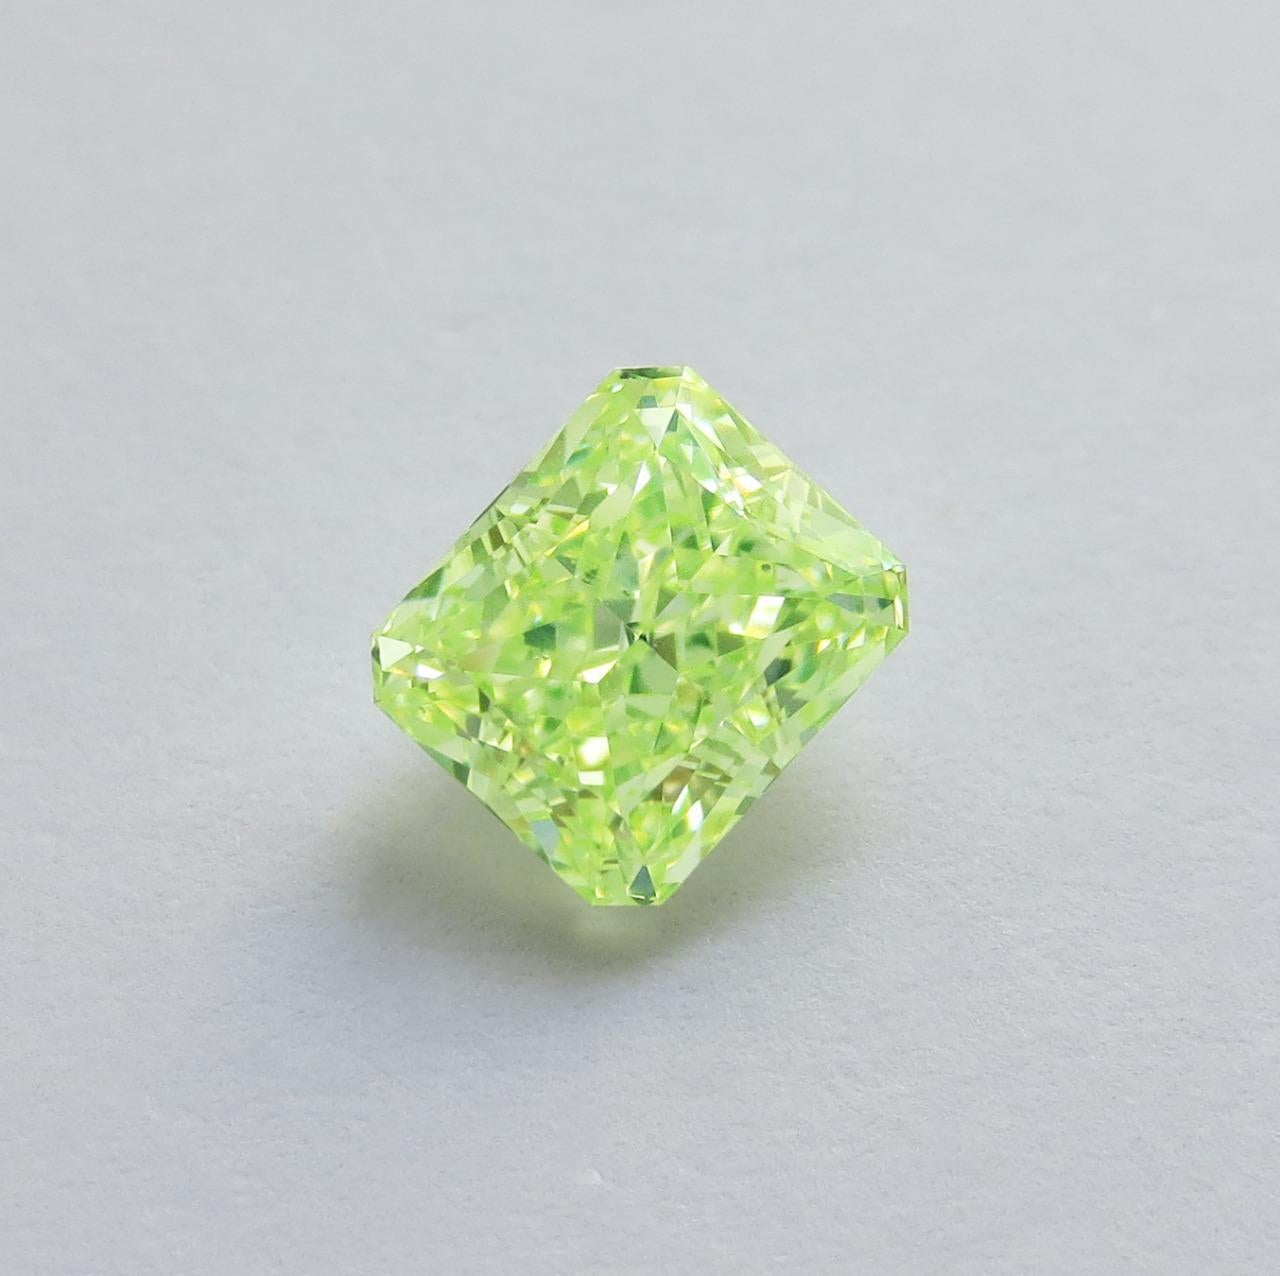 From the Emilio Jewelry Museum Vault, Showcasing a magnificent 1.50 carat natural Gia certified Fancy intense pure green diamond with no overtone. 
Send us an image of your dream design, custom work is our passion. Private showings may be available